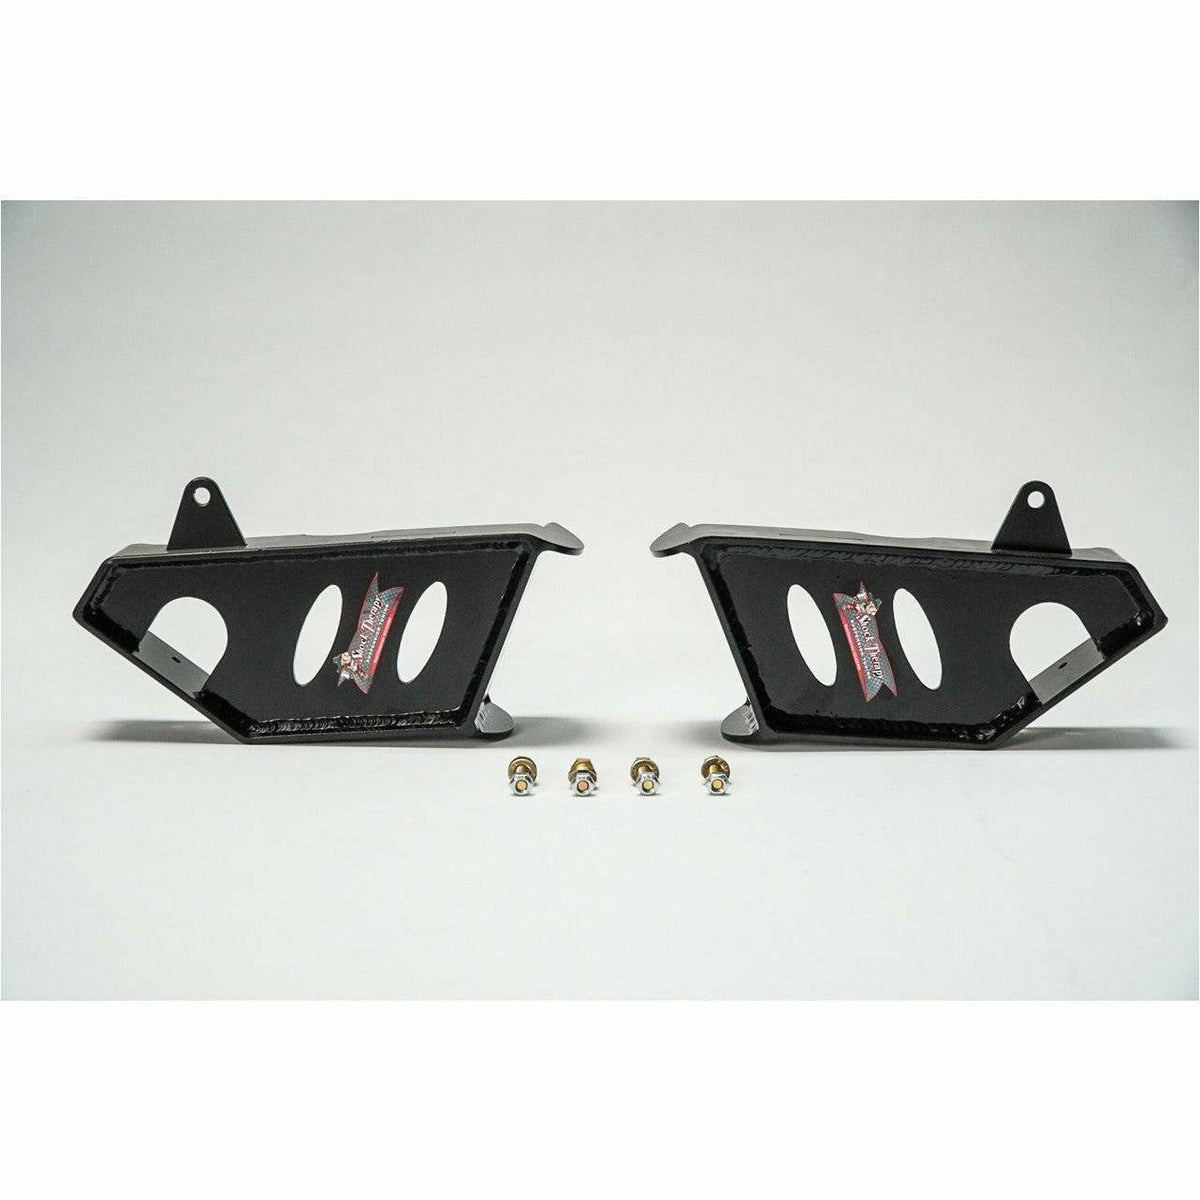 Shock Therapy Polaris RZR Frame Supports